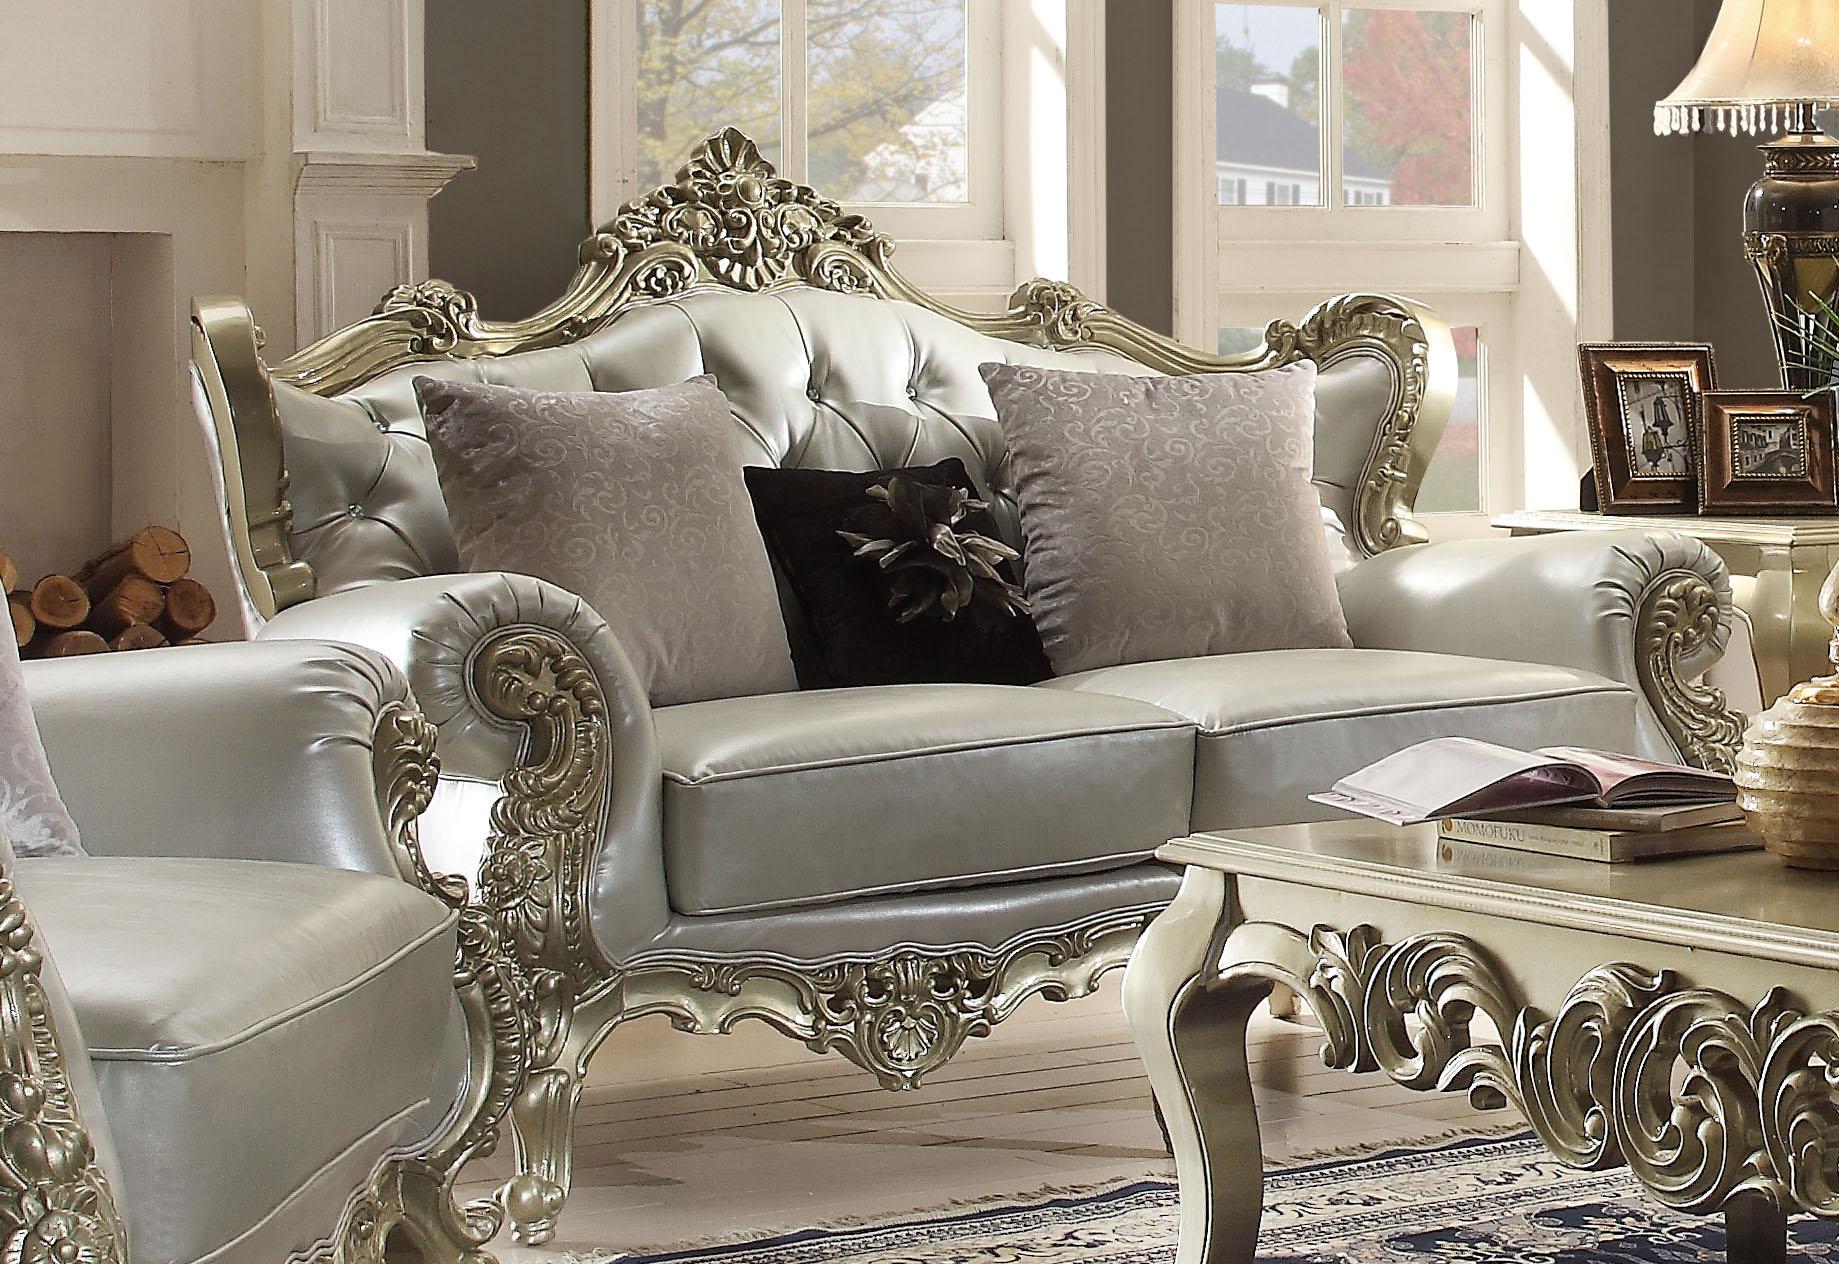 

    
Belle Silver Victorian Loveseat Traditional Homey Design HD-13006
